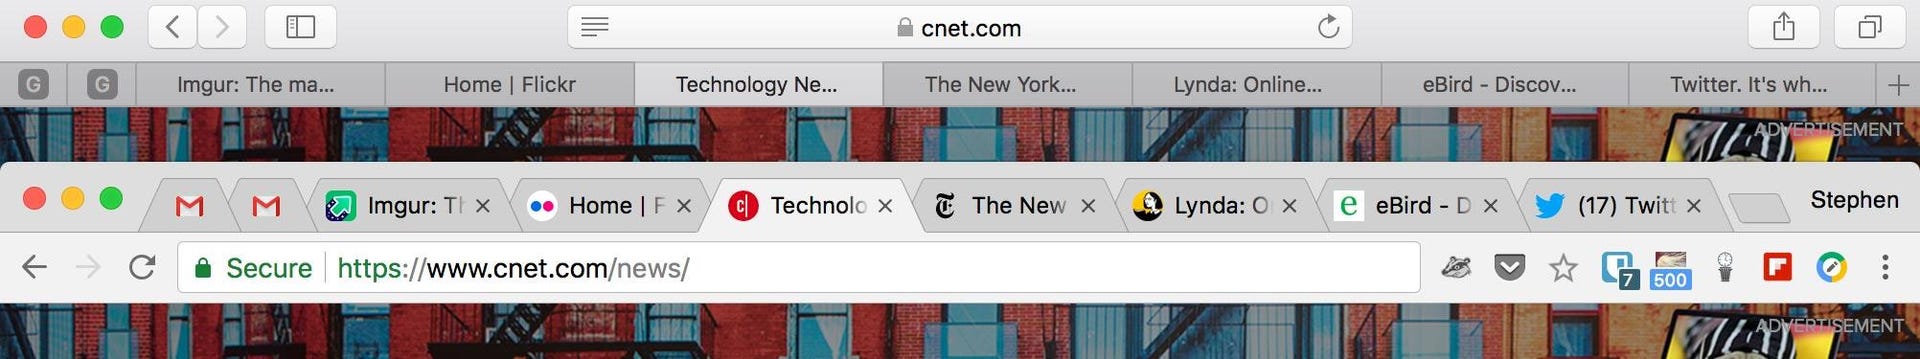 Today, Safari shows plain text vs the colorful website favicons in Google's Chrome and other high-profile browsers.